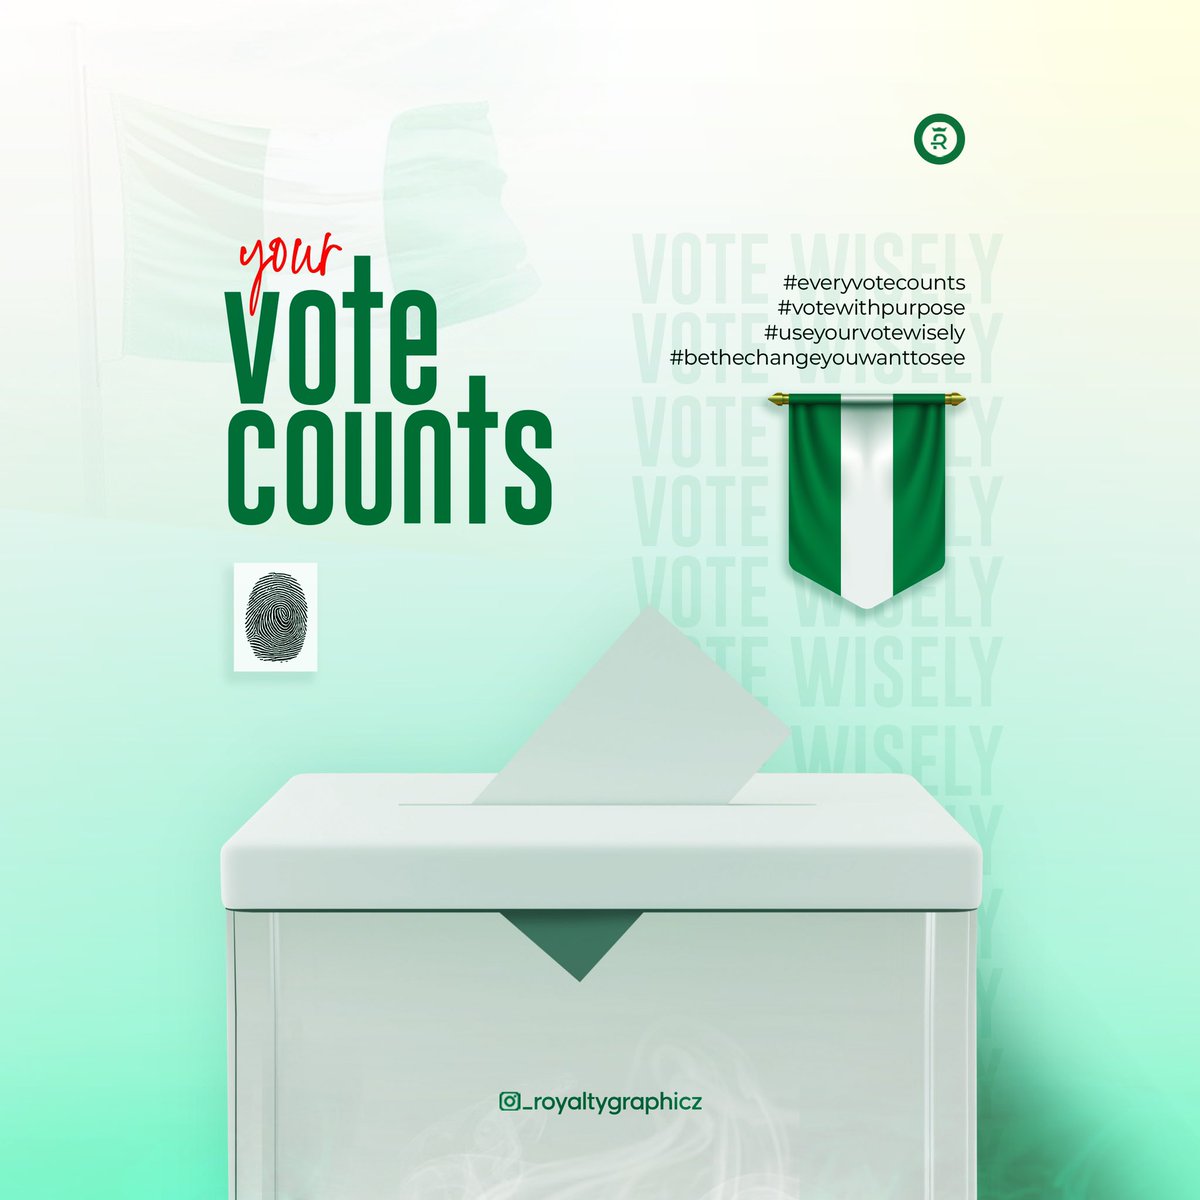 Be the change you want to see. Vote Wisely. 🇳🇬

#NigeriaElection2023 #VoteNigeria #NigeriaDecides #DemocracyInAction #ElectionPreparation #CivicDuty #ElectionAwareness #PoliticalEngagement